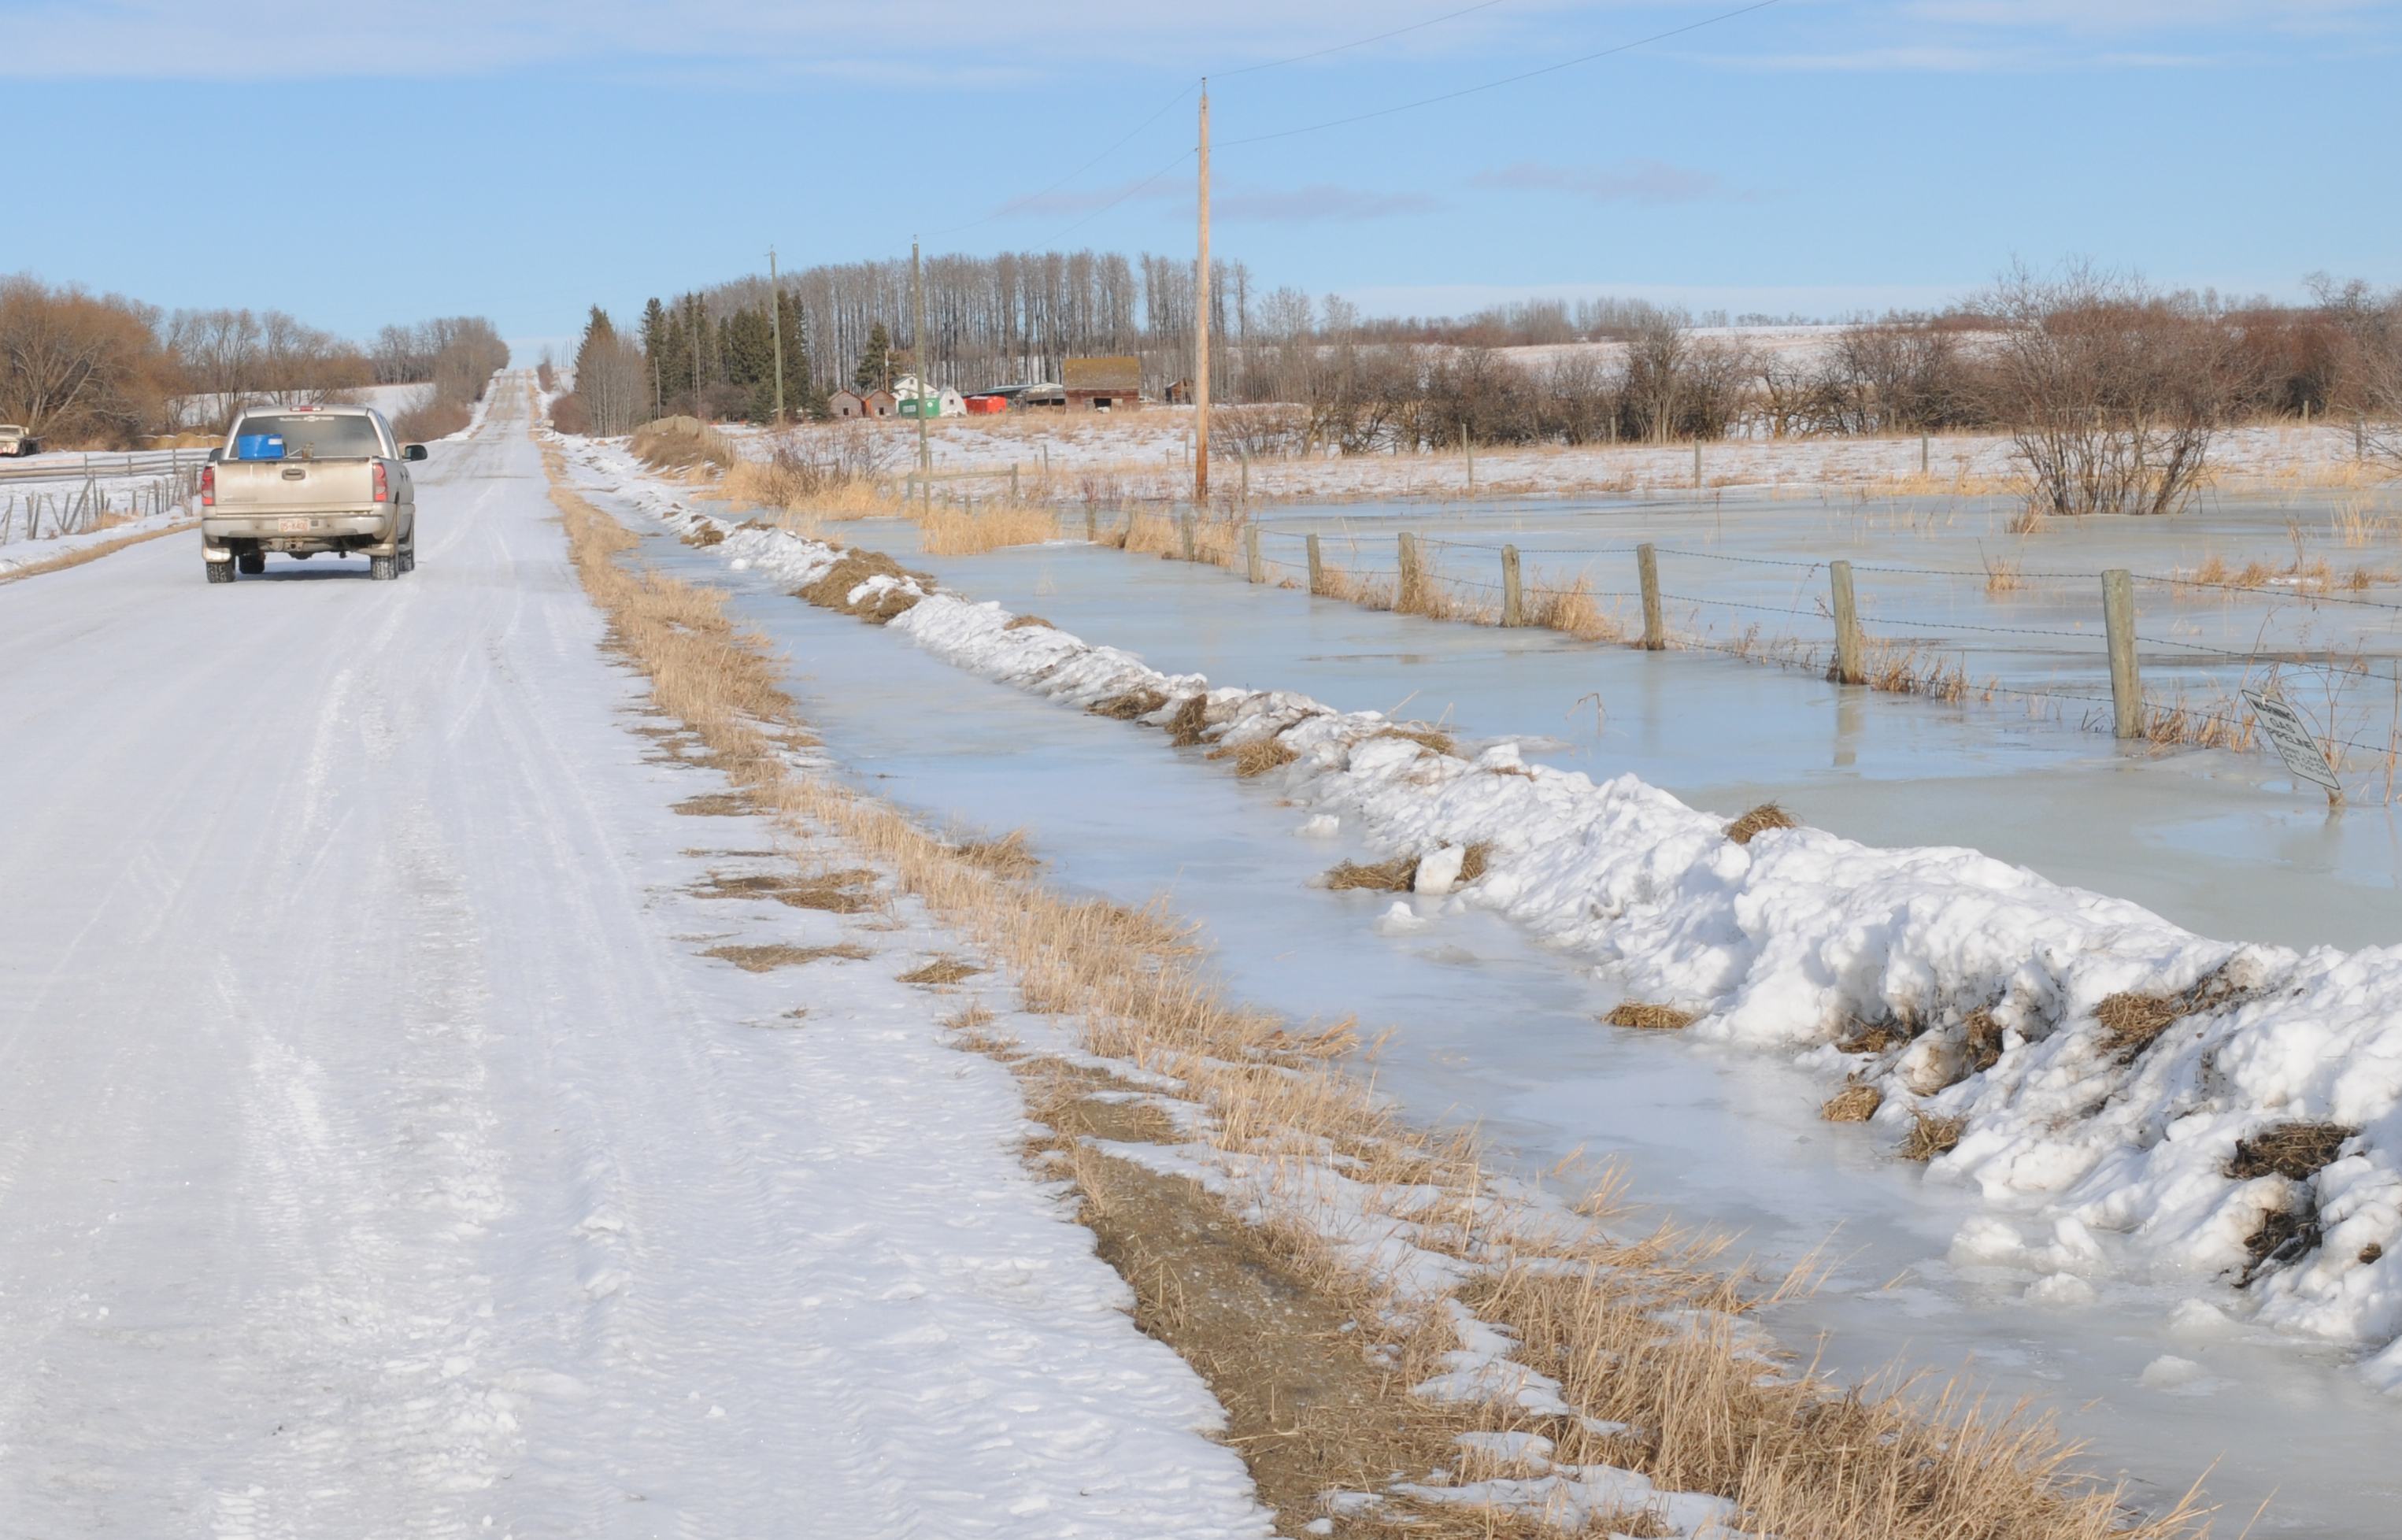 FLOOD- Due to the warm weather water has accumulated in a ditch along a Red Deer County road almost overflowing